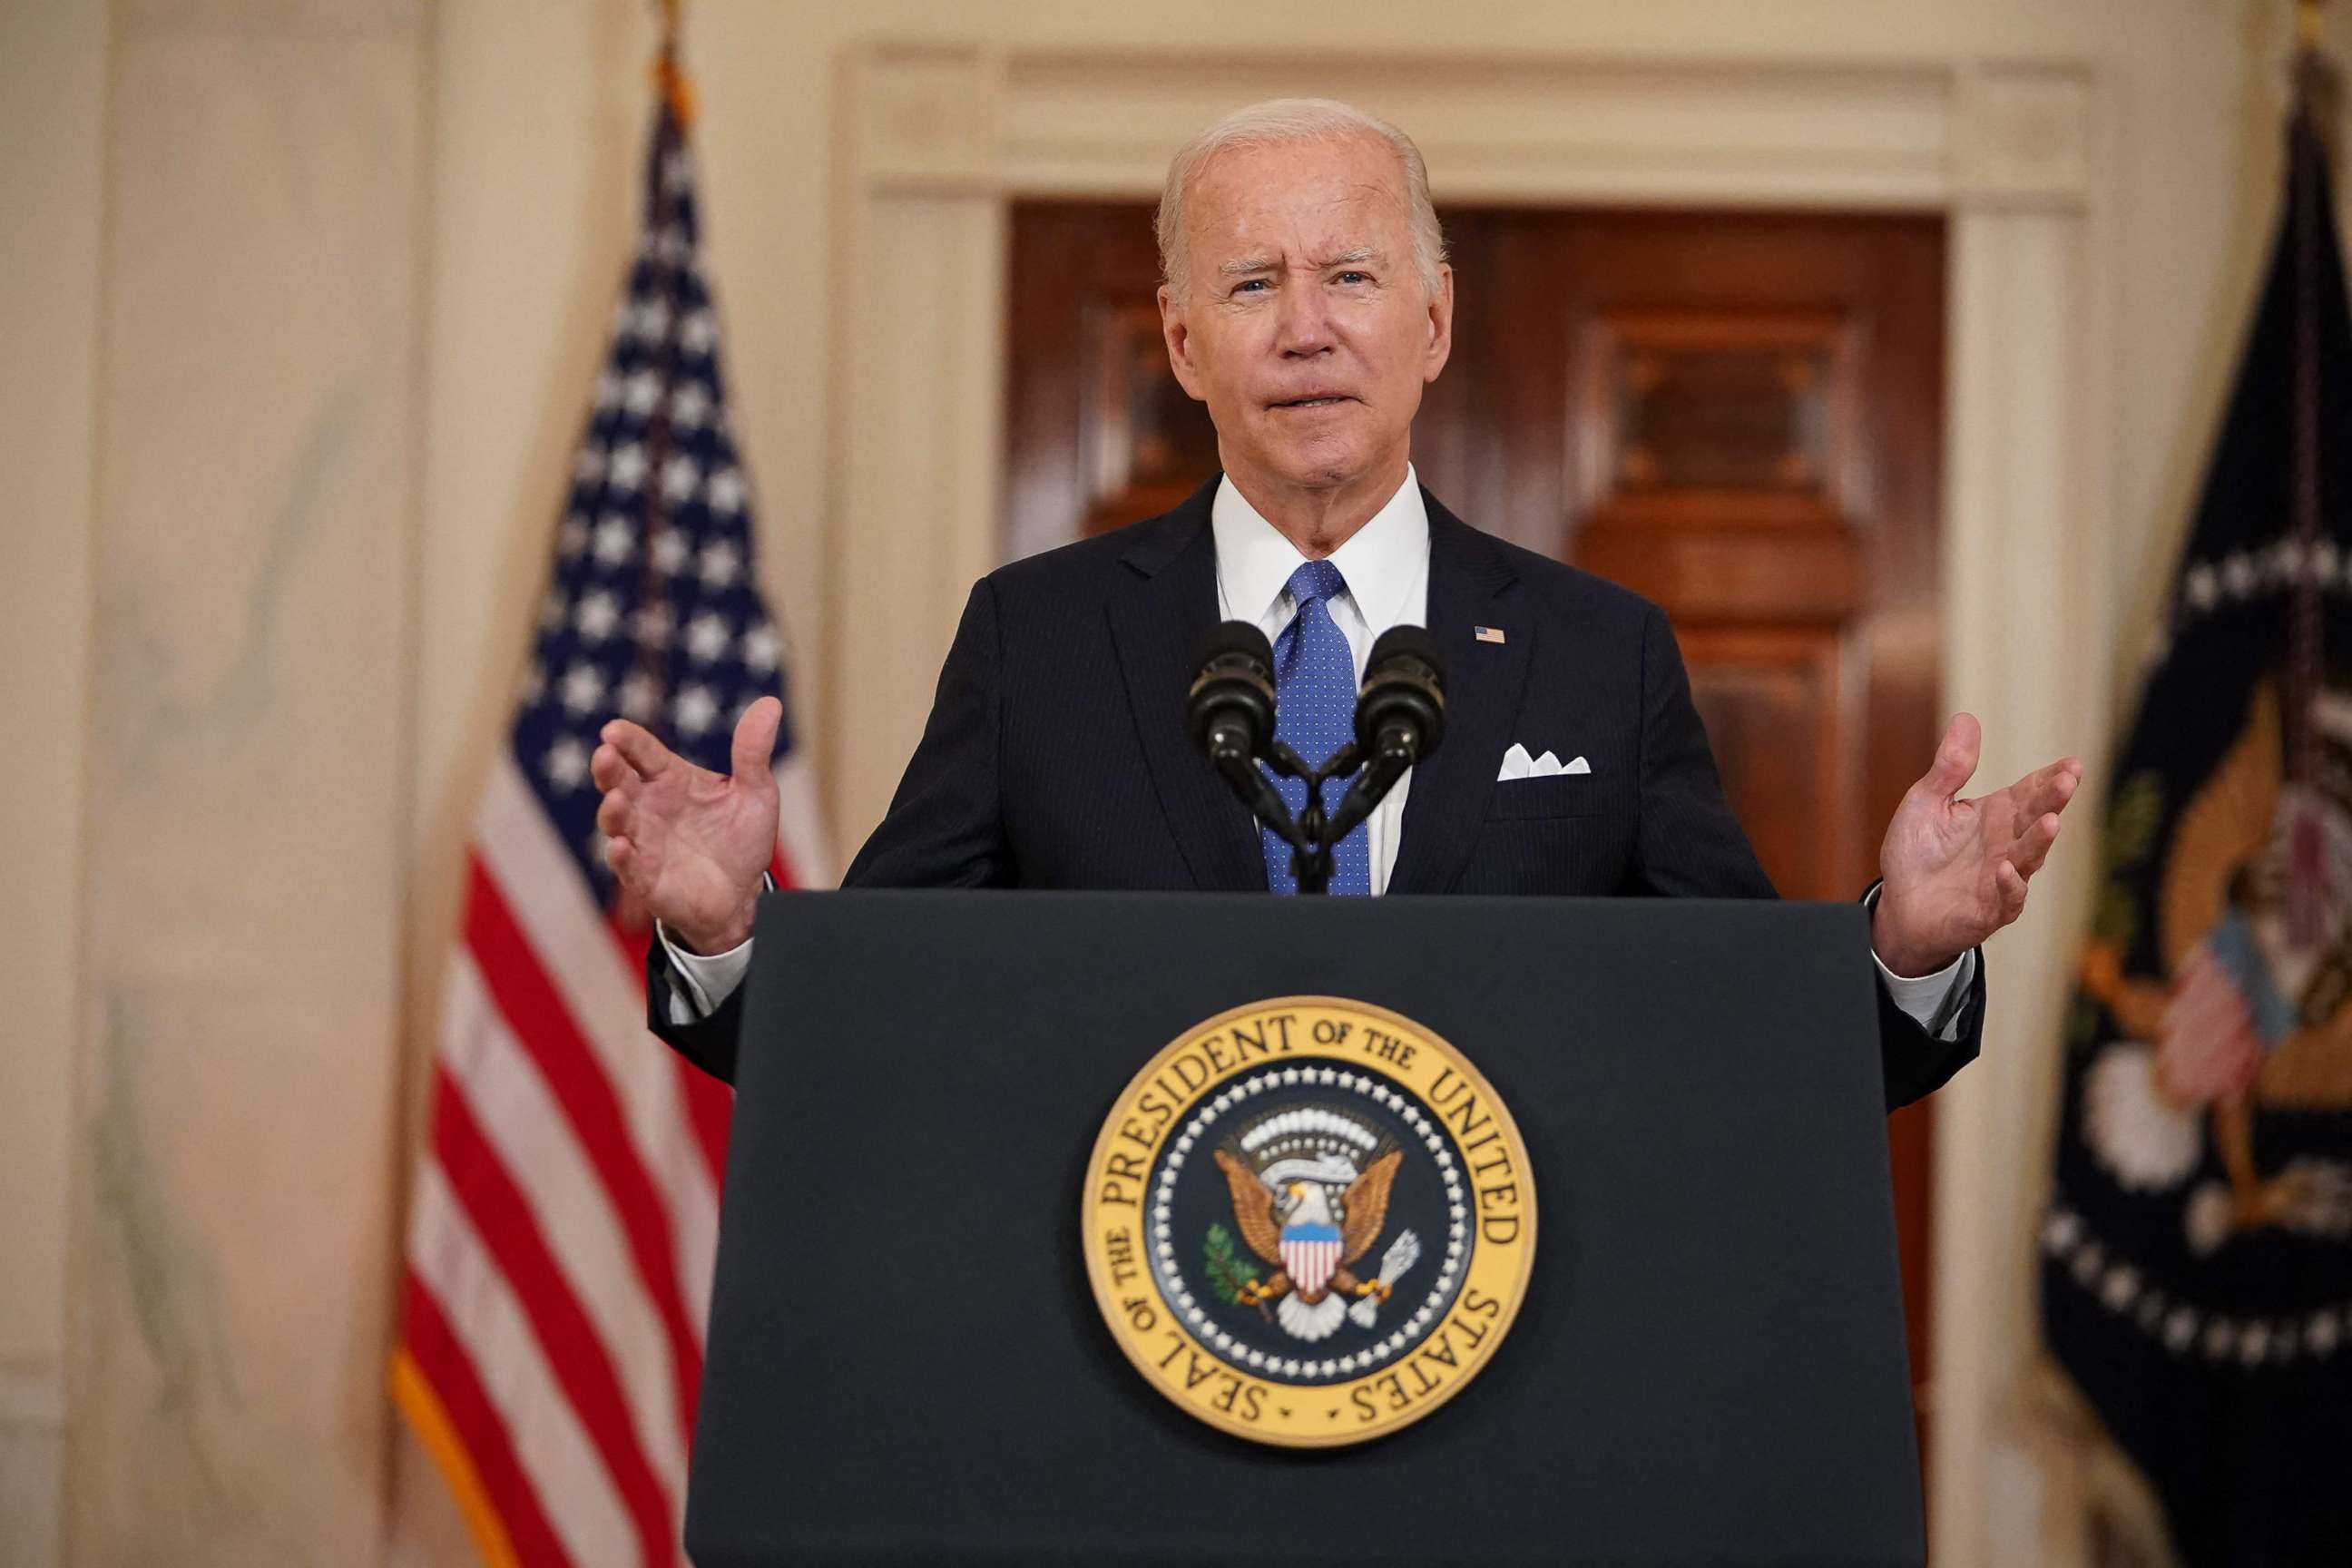 PHOTO: President Joe Biden addresses the nation at the White House in Washington, June 24, 2022, following the US Supreme Court's decision to overturn Roe vs. Wade.